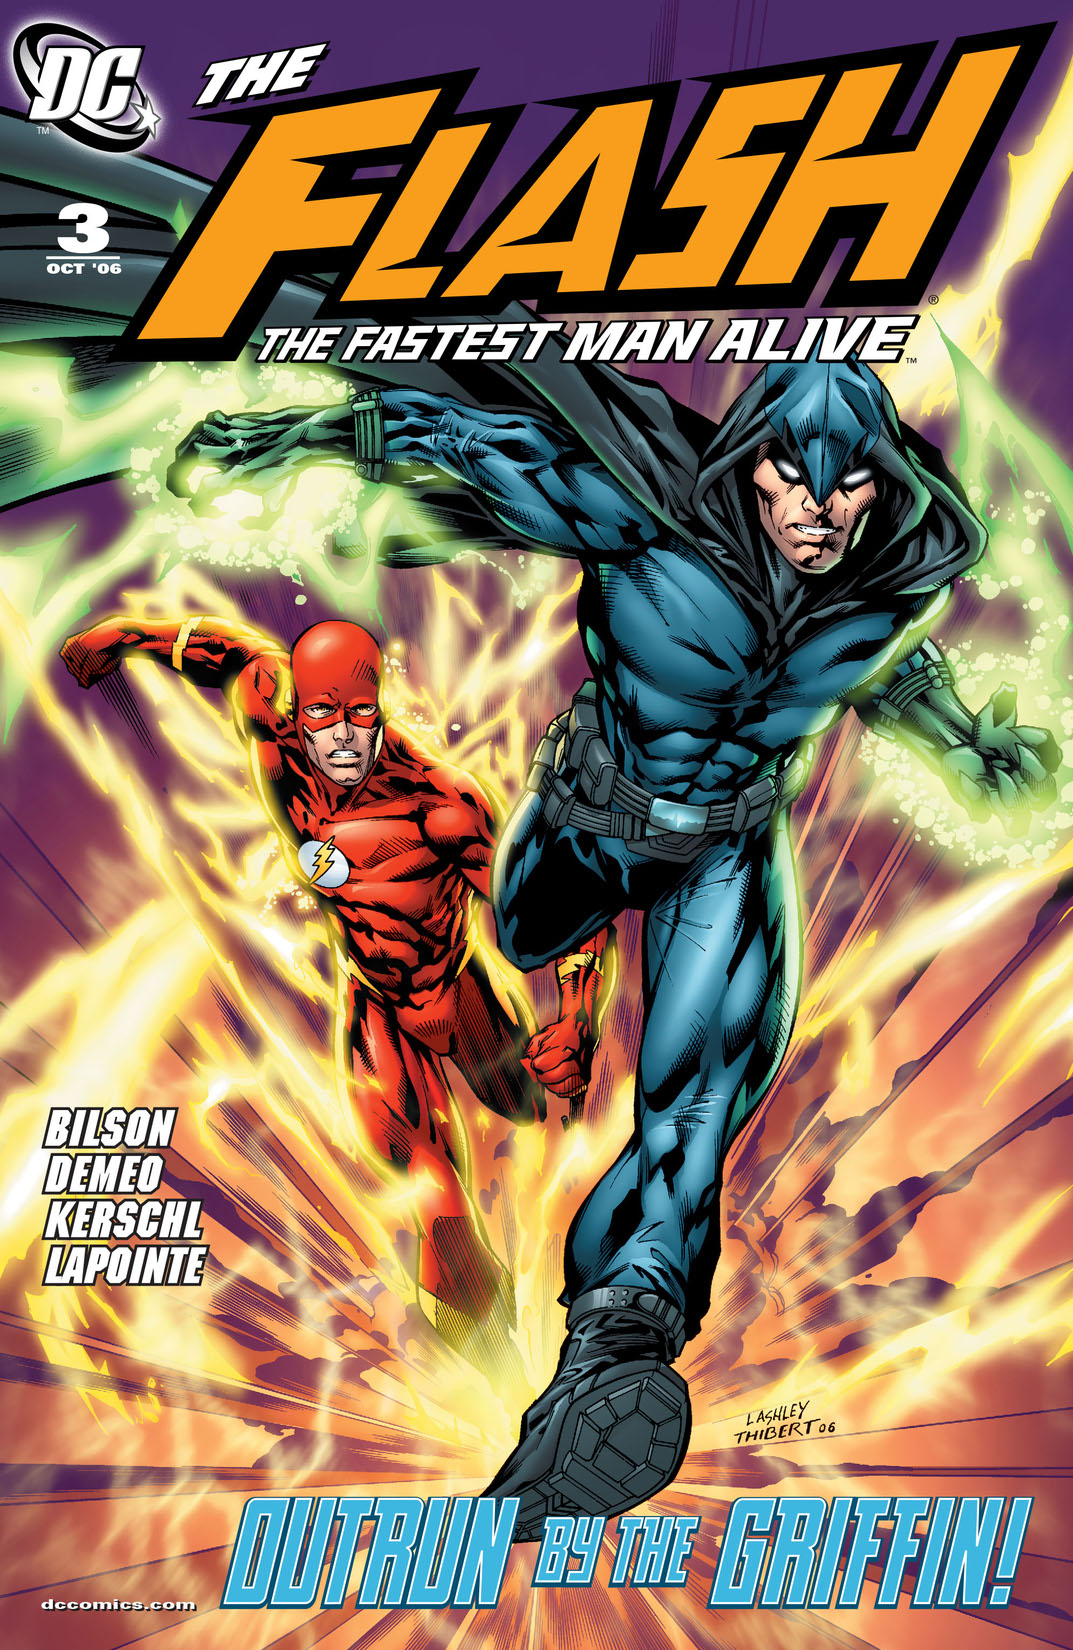 Flash: The Fastest Man Alive #3 preview images